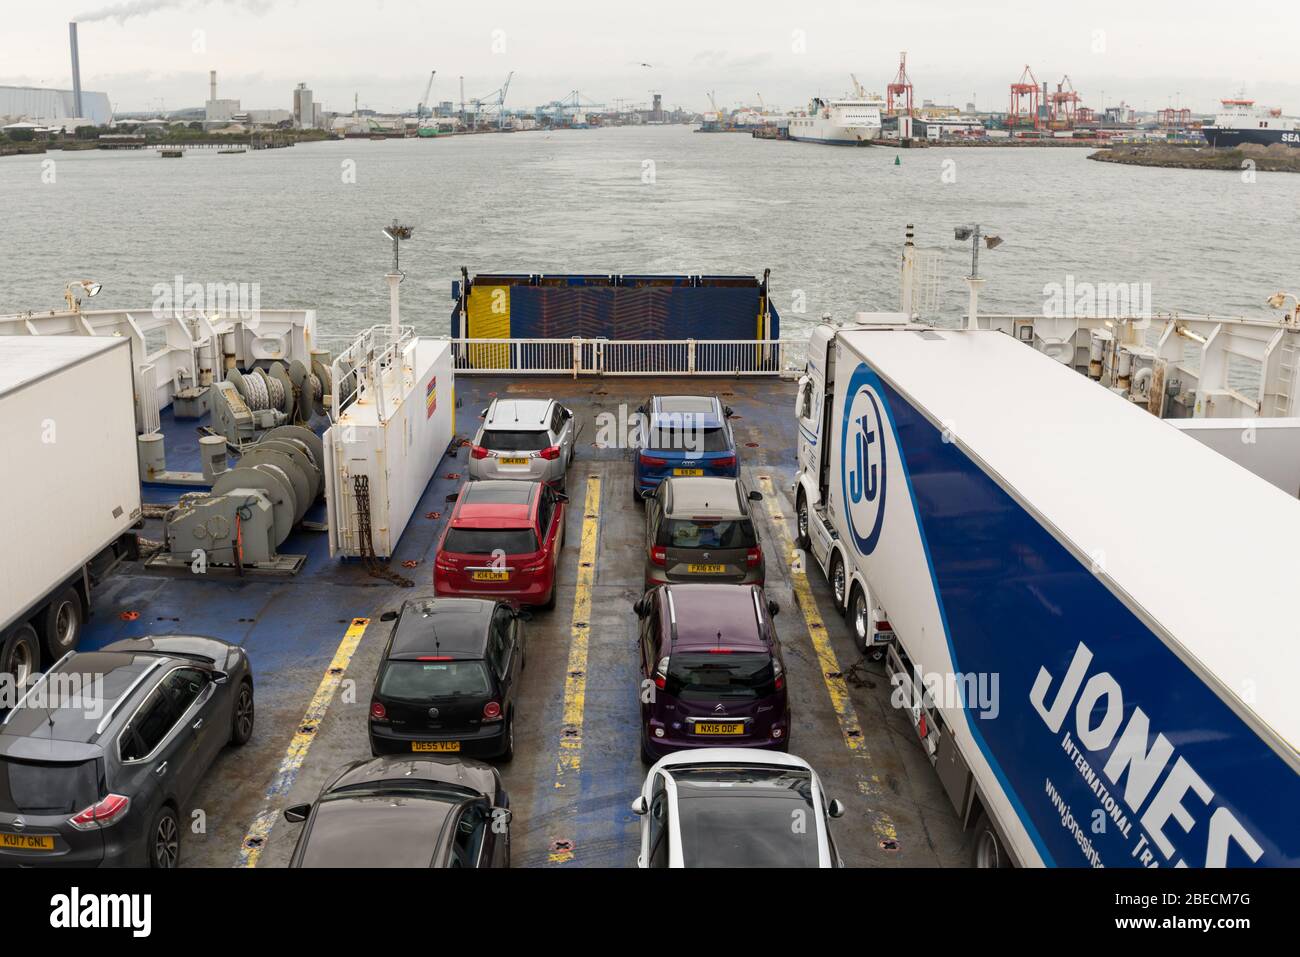 Departing Dublin port by commuter passenger ferry with the city and port in the background and cars and trucks on the deck. Stock Photo